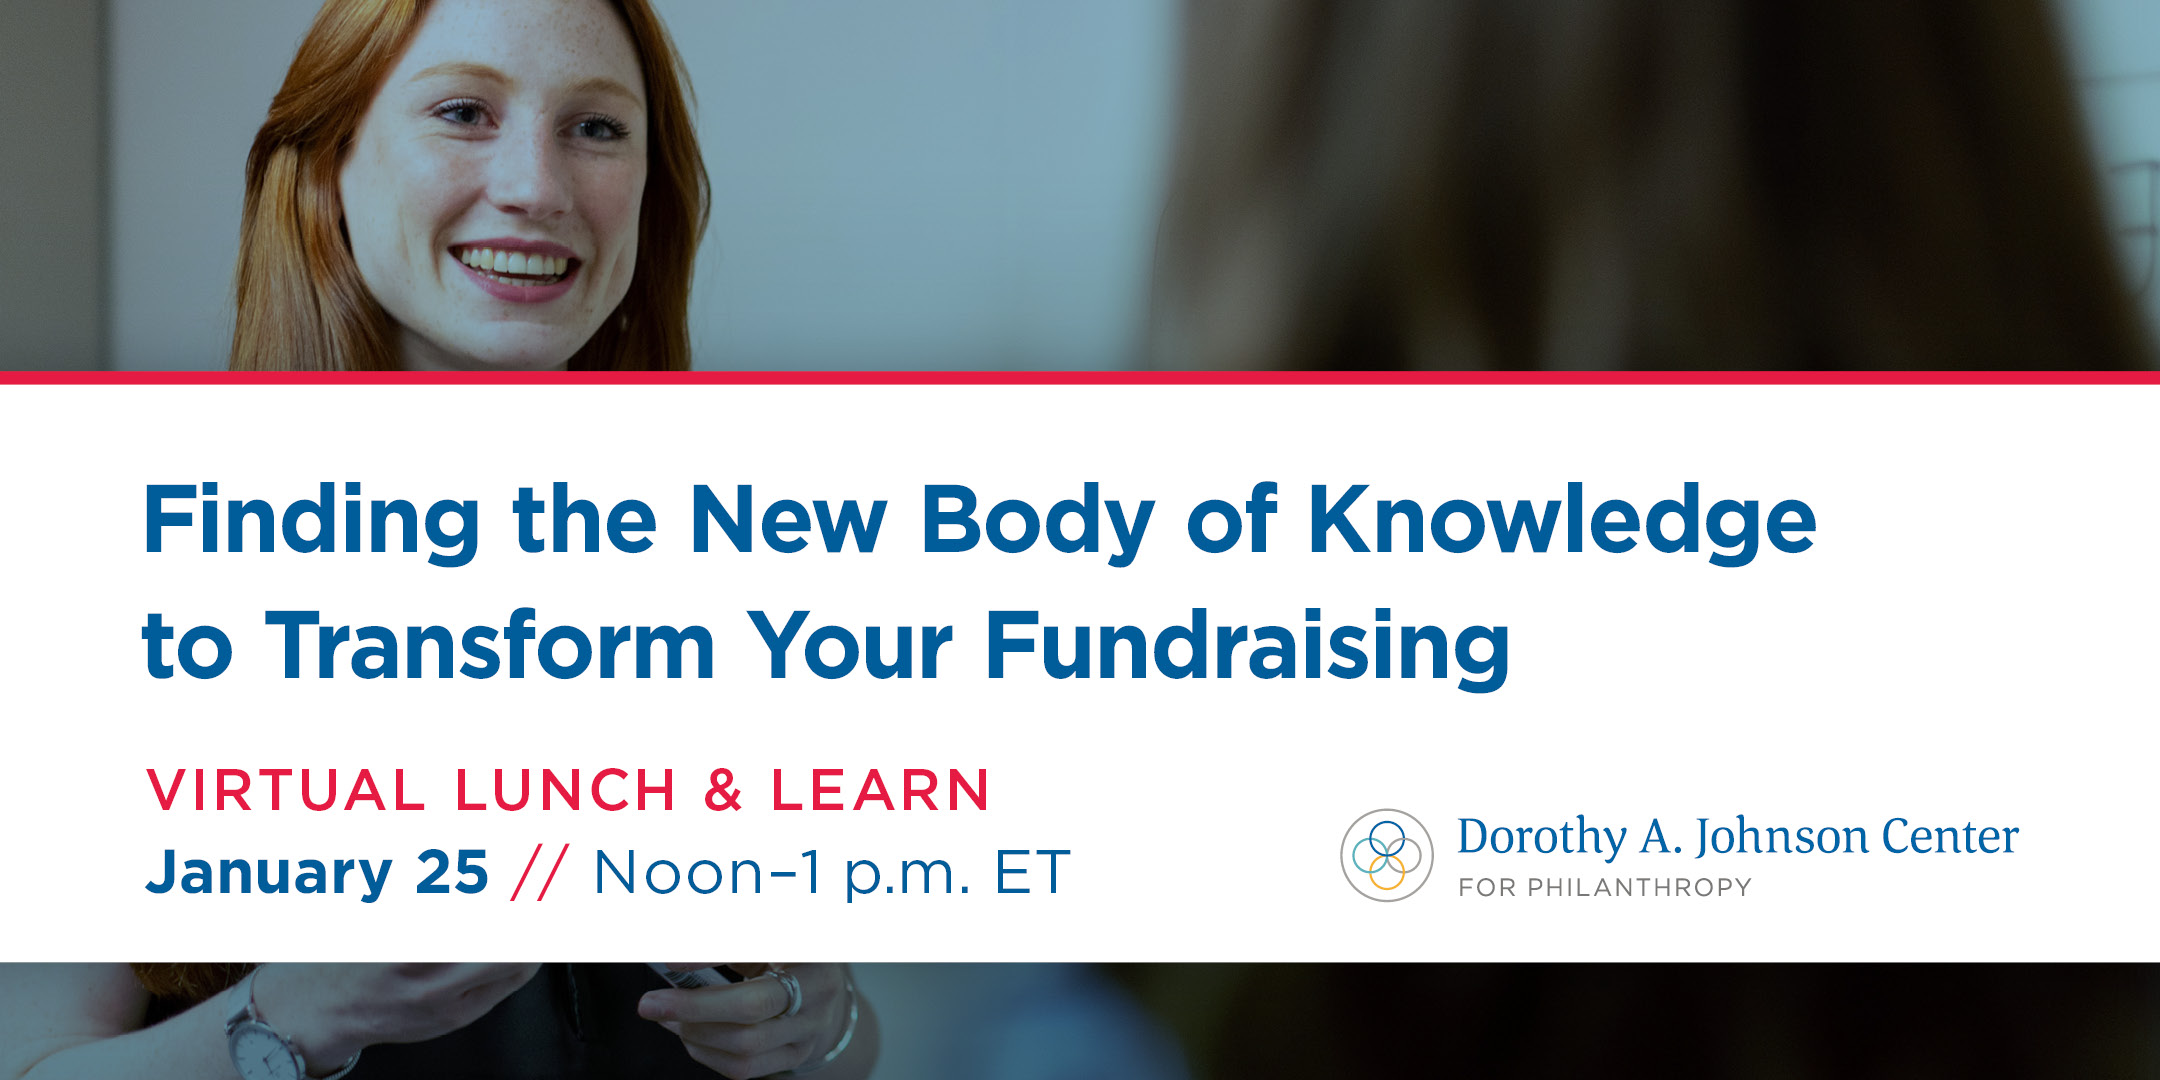 Finding the New Body of Knowledge to Transform Your Fundraising